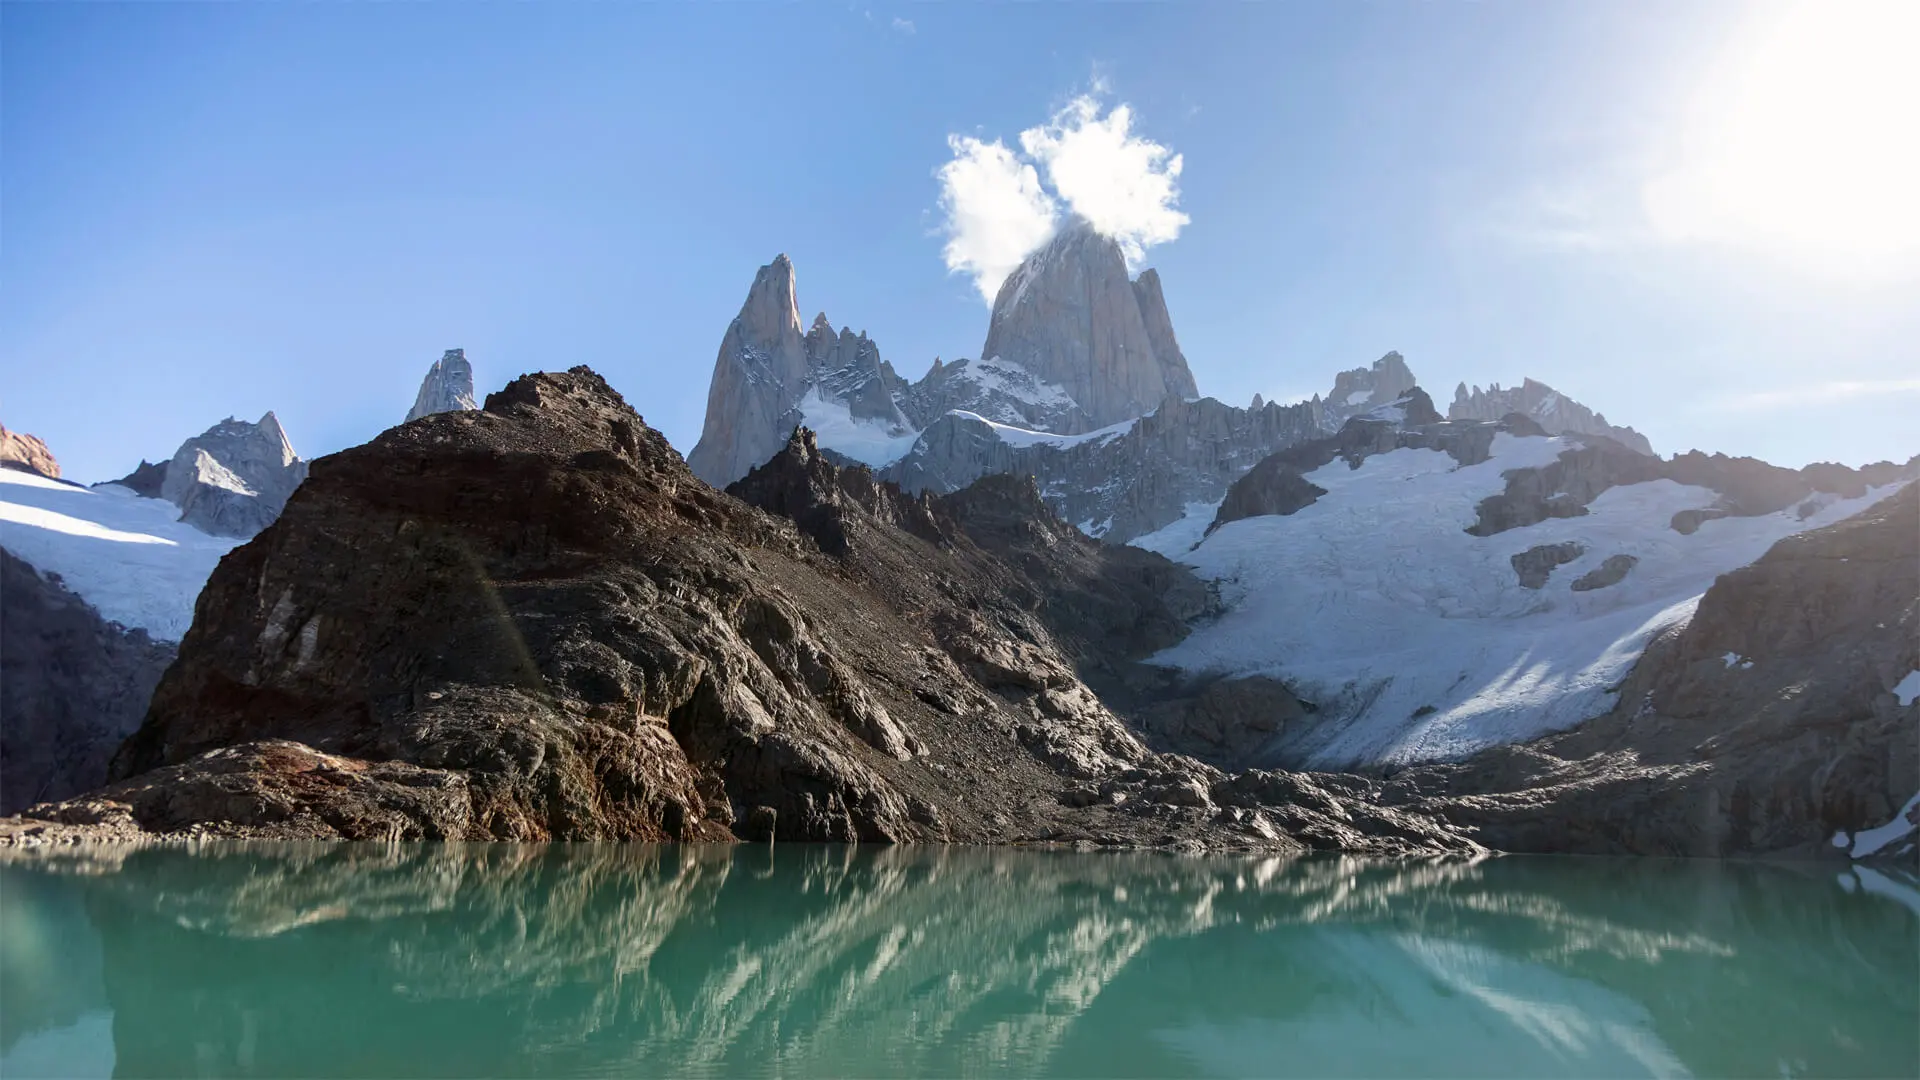 The climate in Patagonia